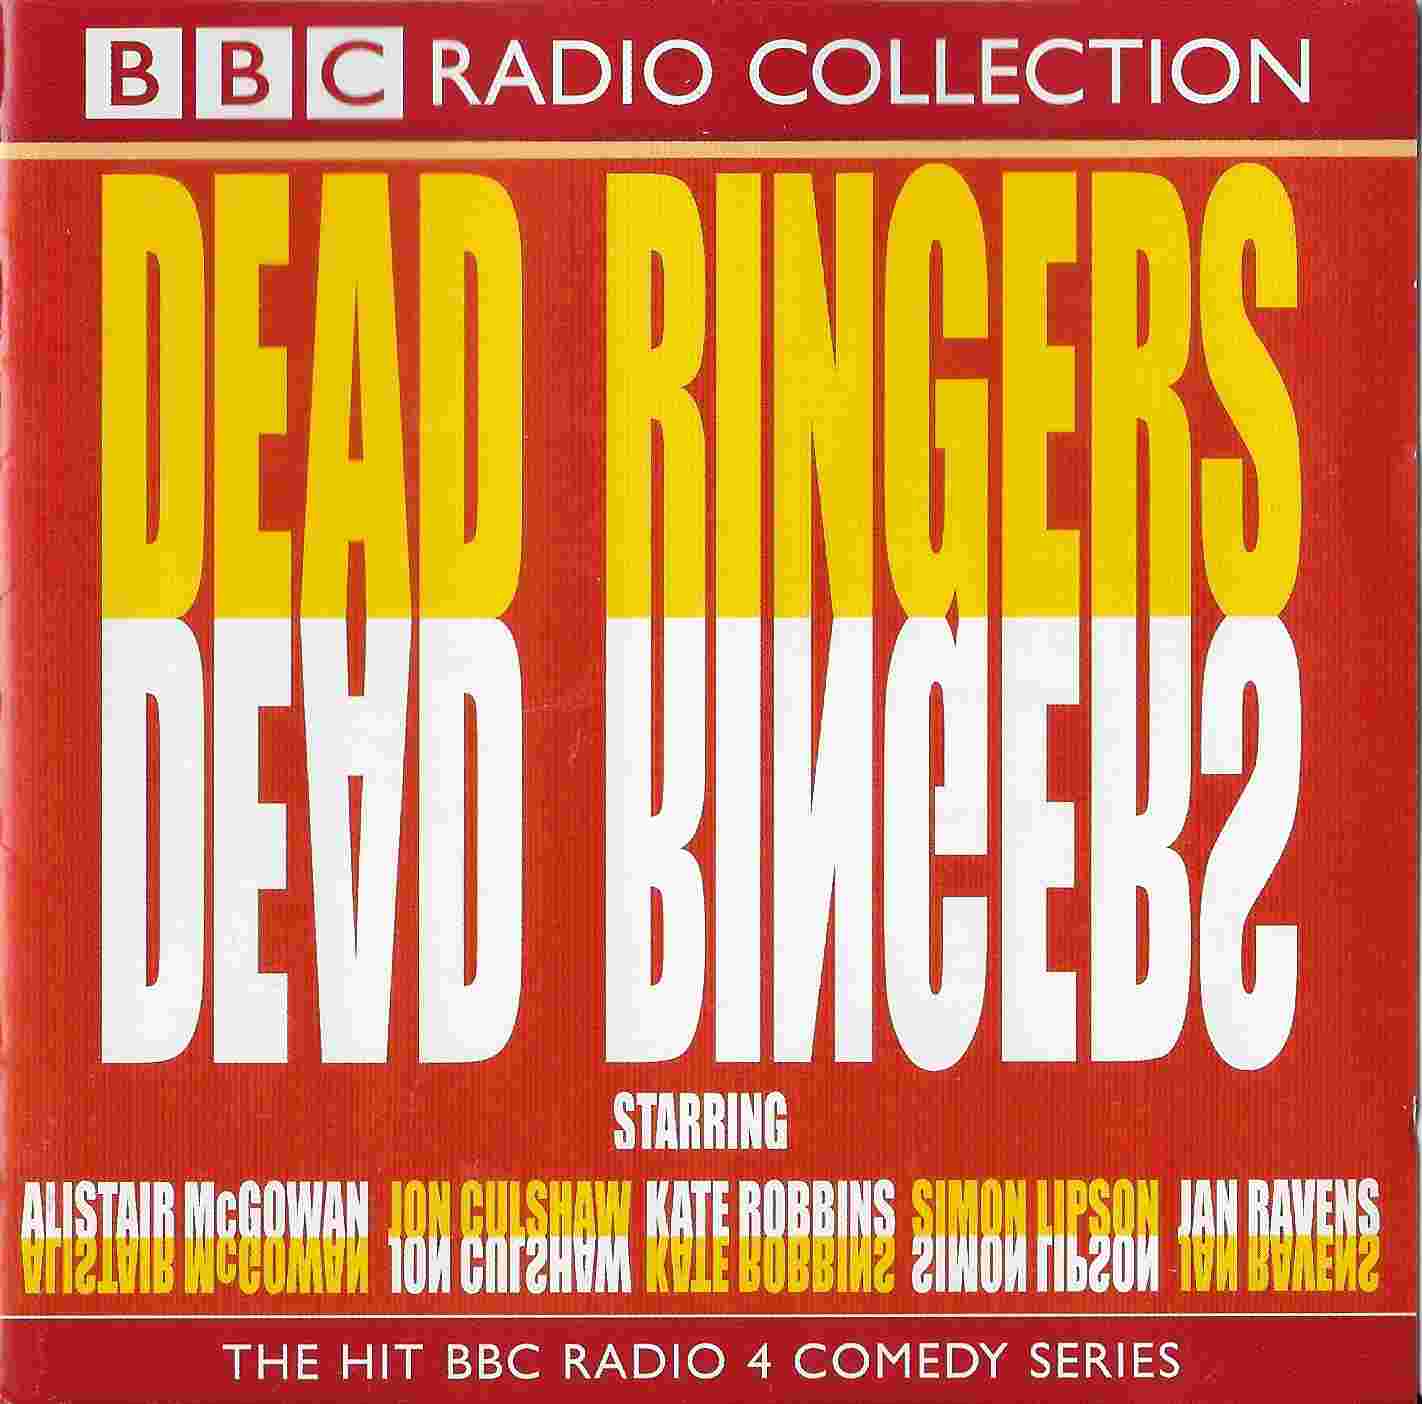 Picture of Dead ringers by artist Various from the BBC cds - Records and Tapes library